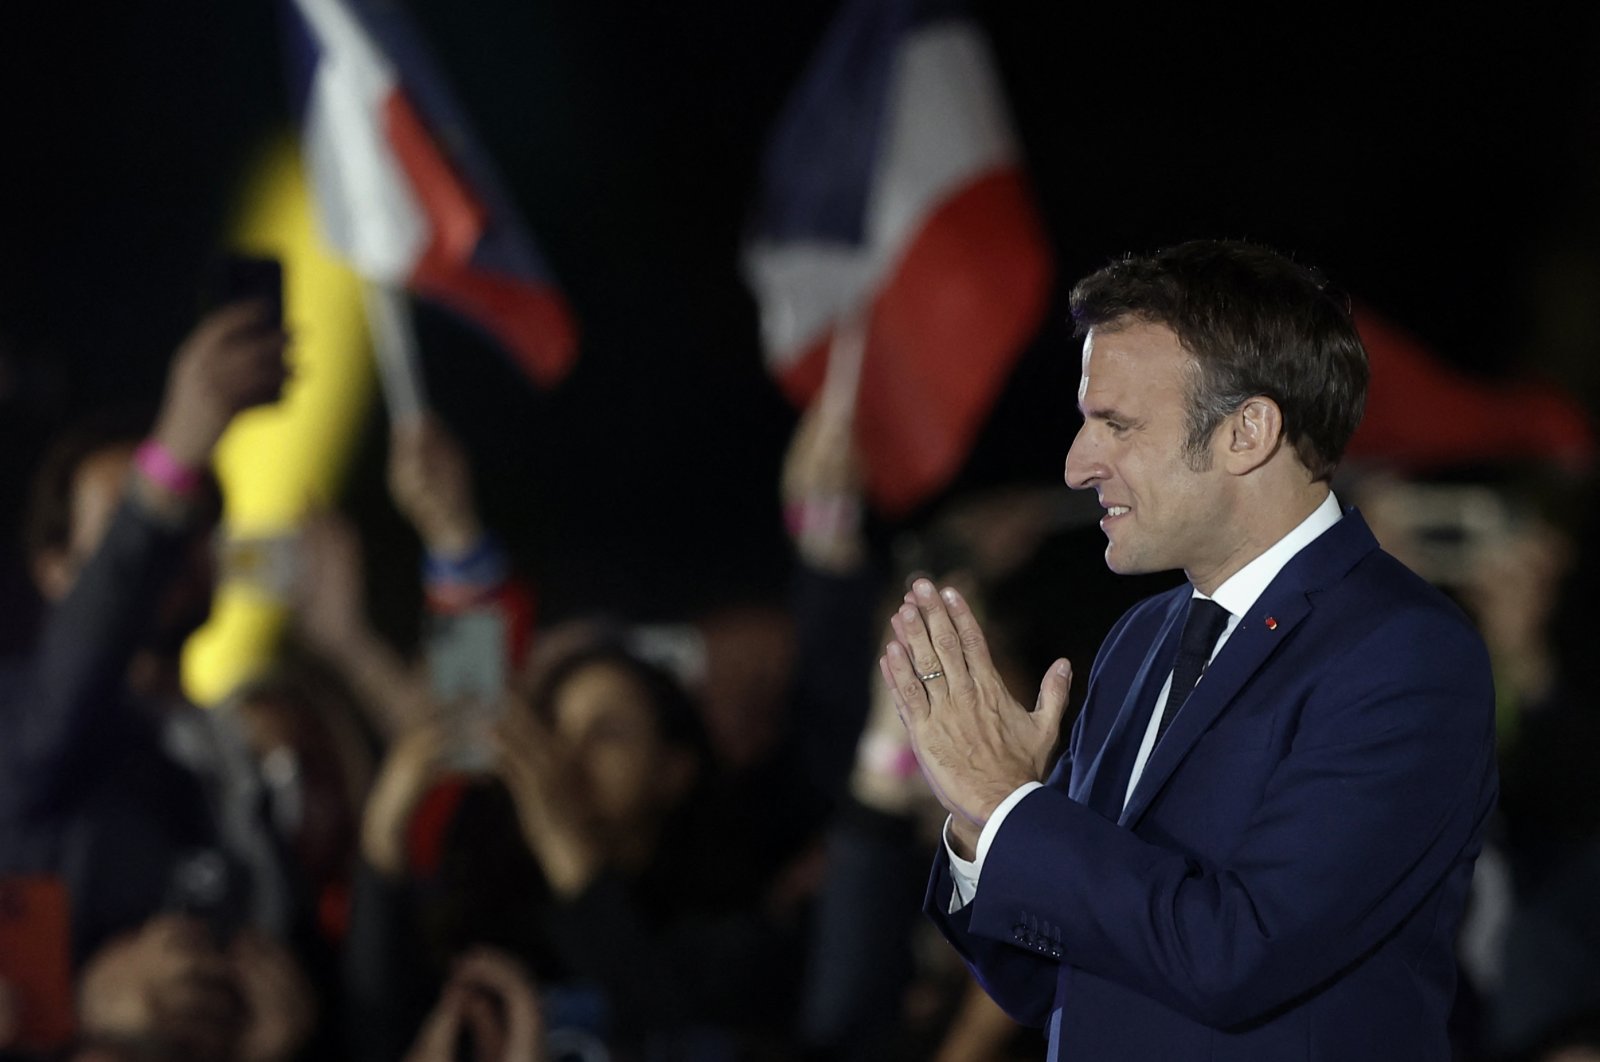 French President Emmanuel Macron gestures as he arrives to deliver a speech after being reelected as president, in Paris, France, April 24, 2022. (Reuters Photo)